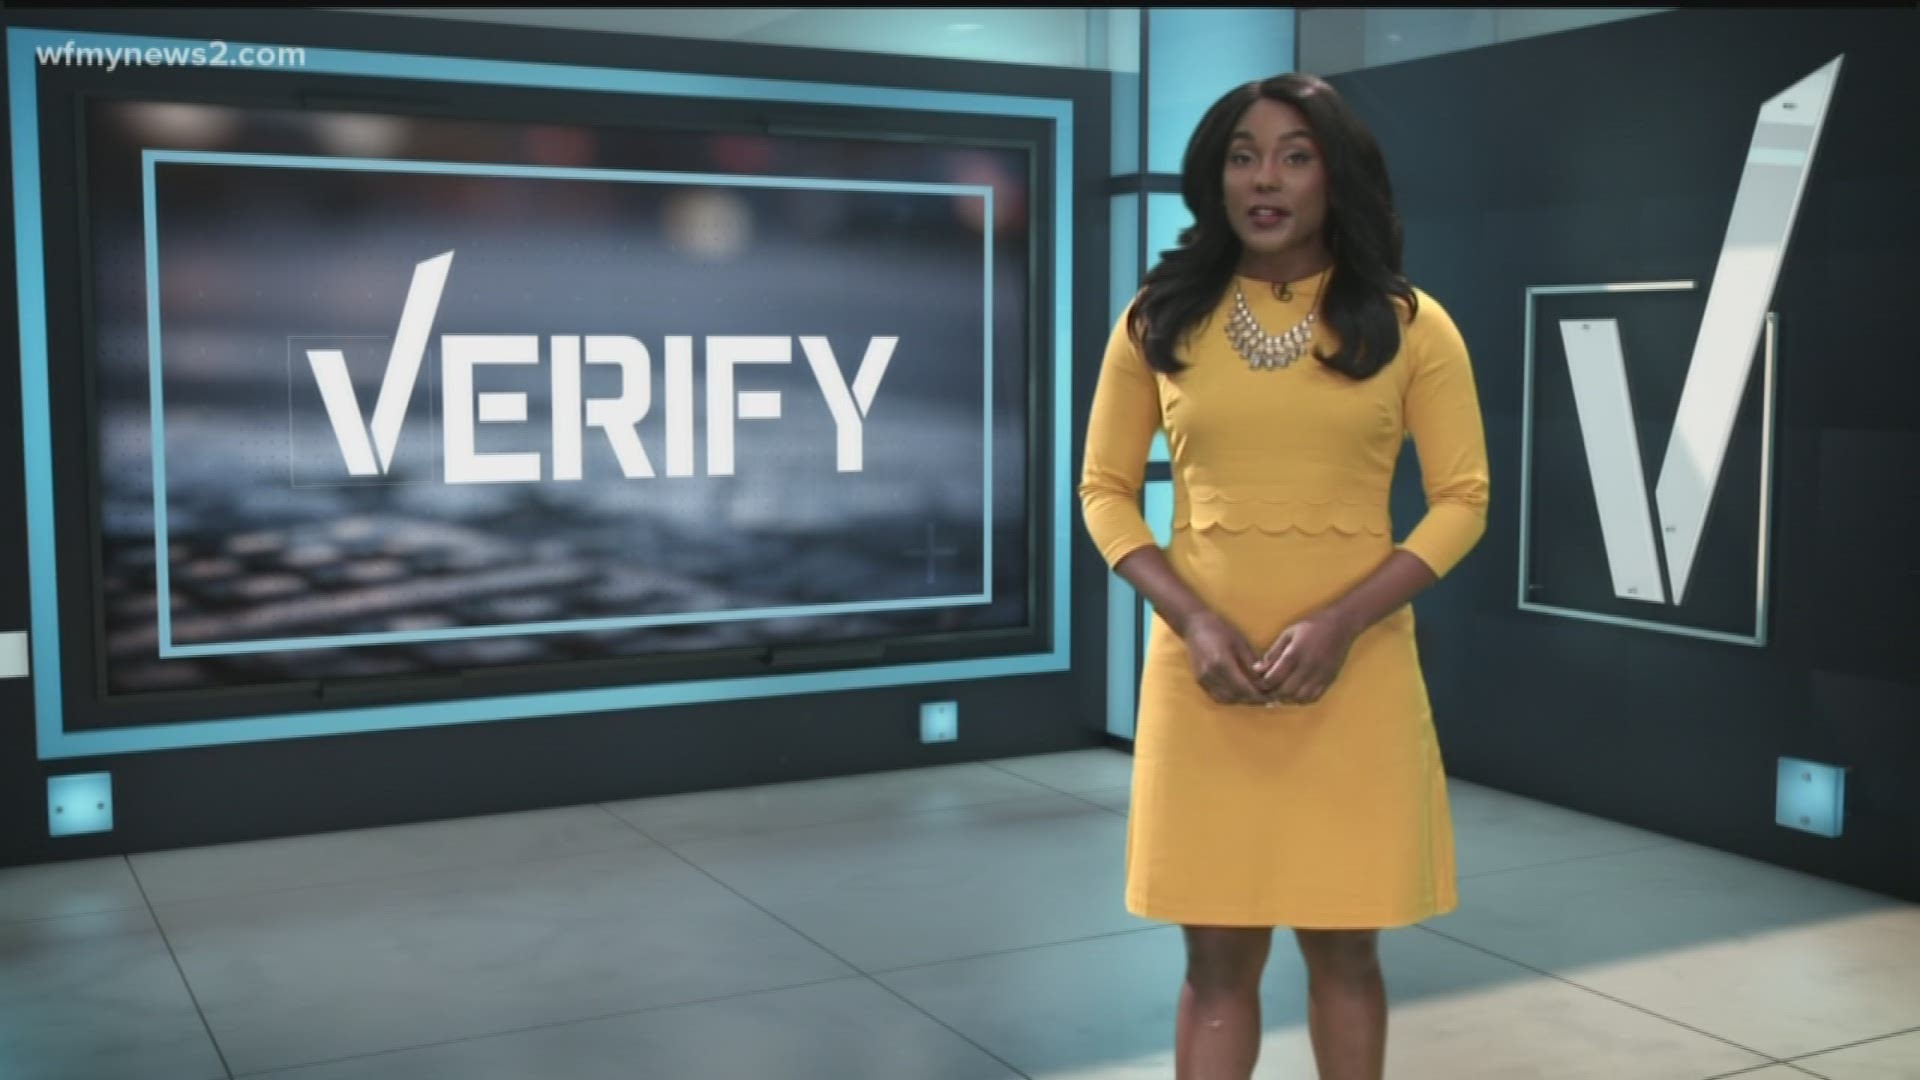 Can you get a passport during the partial government shutdown? Can you enlist in the military? Our Verify team answers those questions and more.